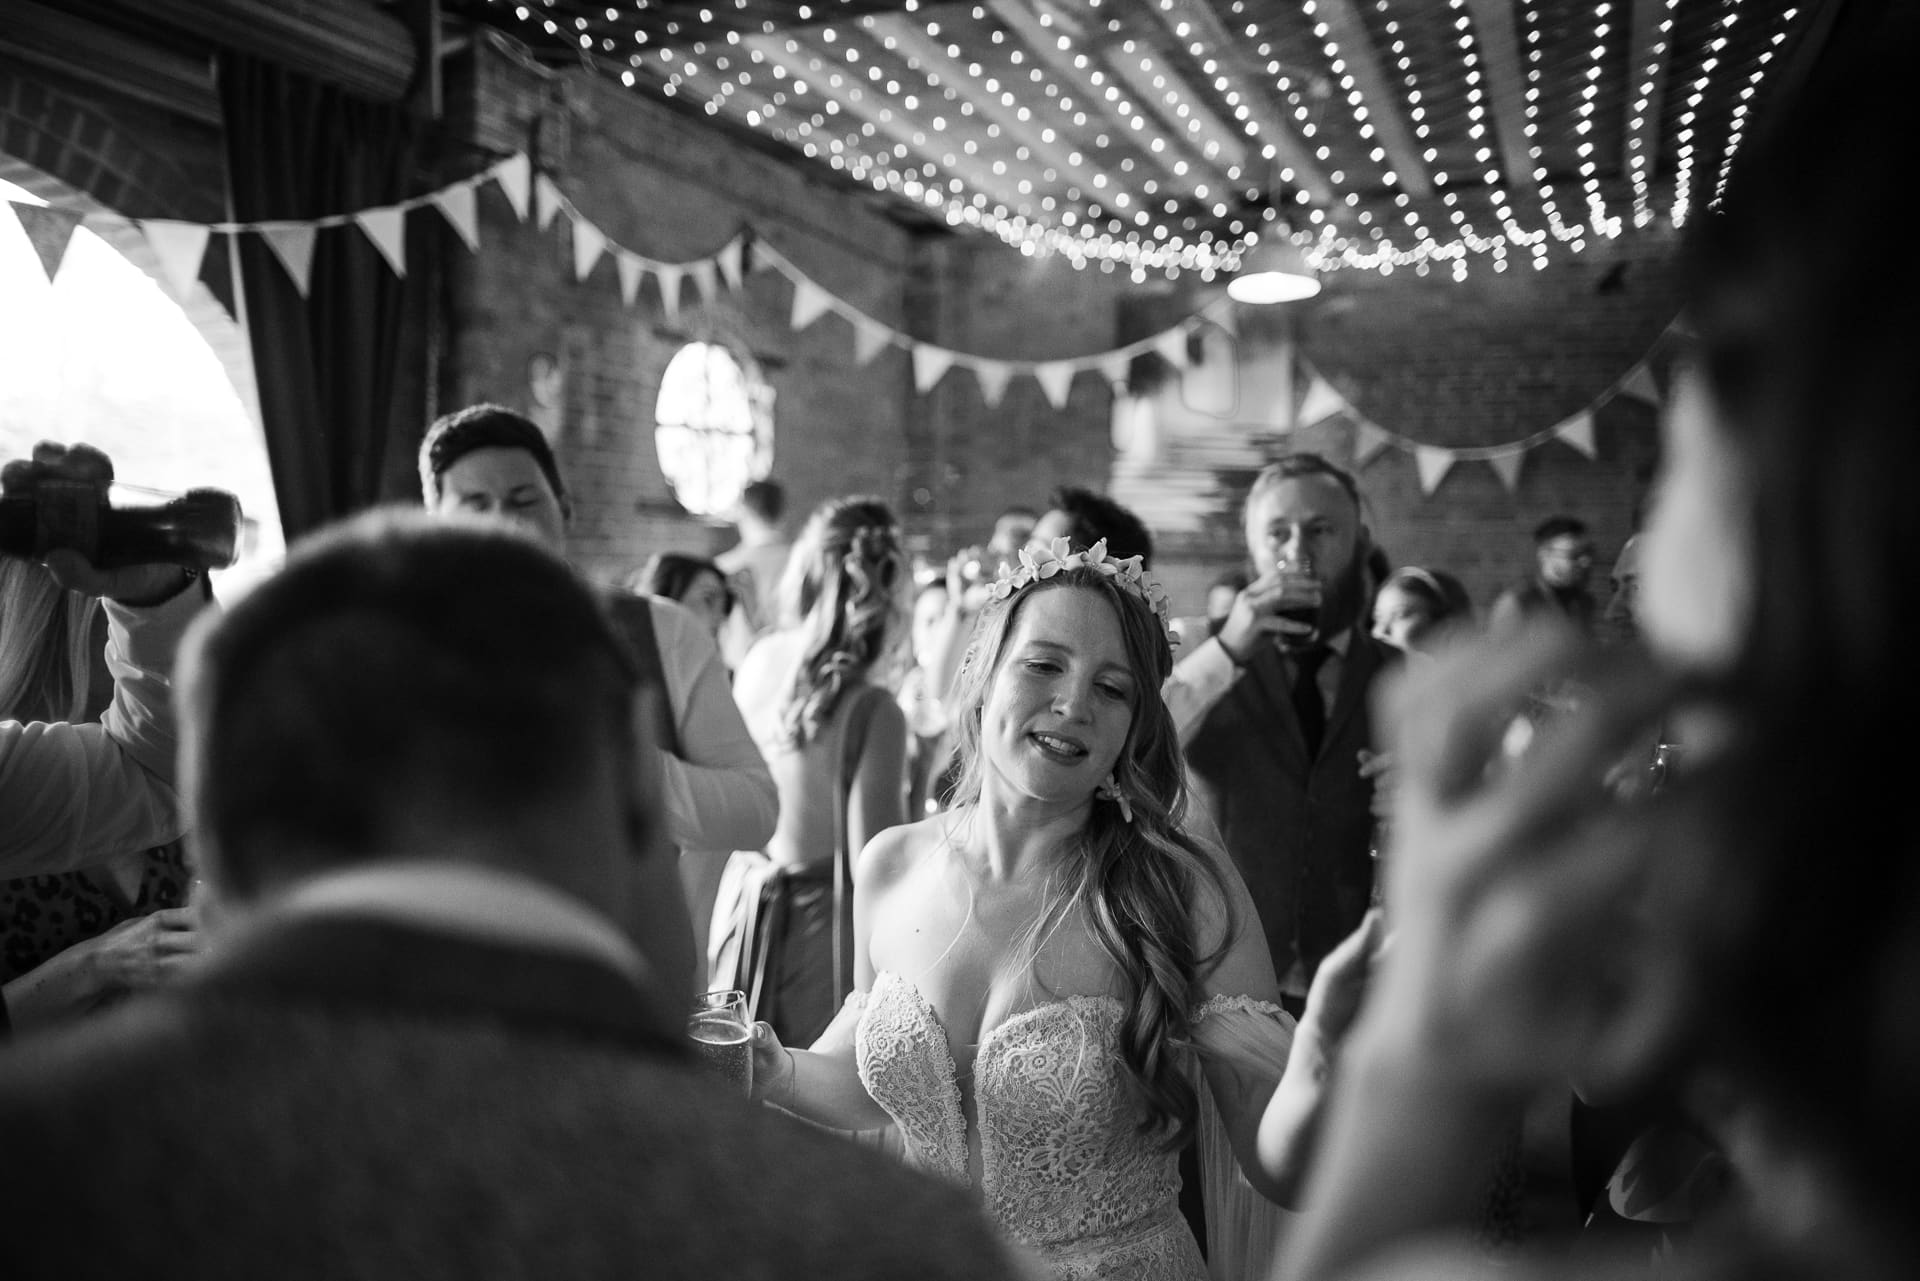 The Bride dancing on the dancefloor at the Cherwell Boathouse